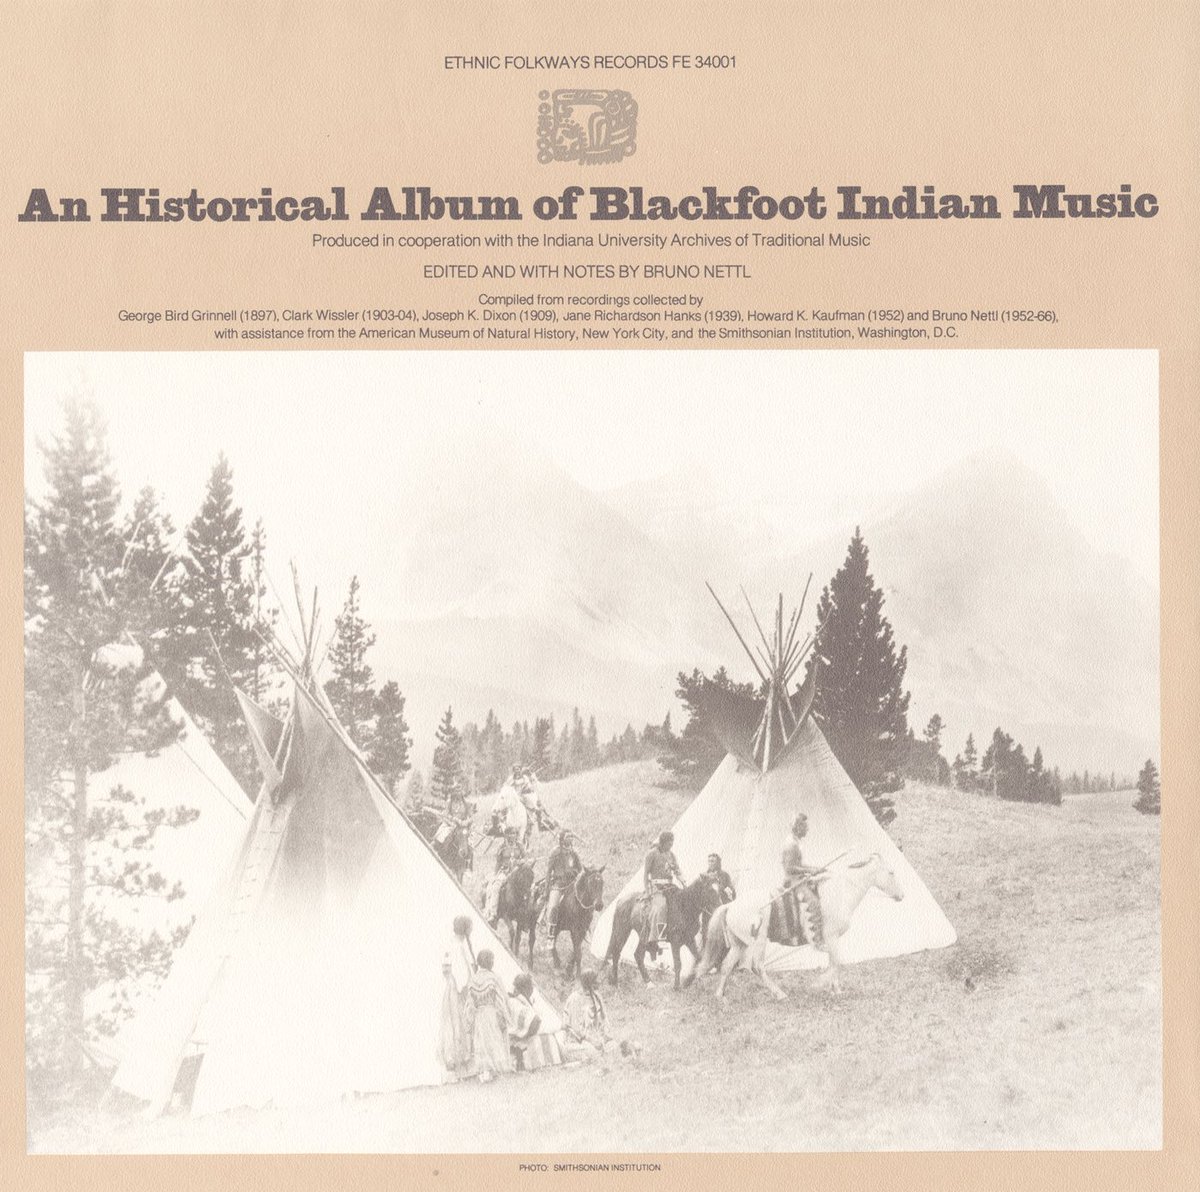 063 VARIOUS ARTISTS An Historical Album of Blackfoot Indian Music (1979) Smithsonian Folkways is never terribly cryptic with their naming conventions. 😂